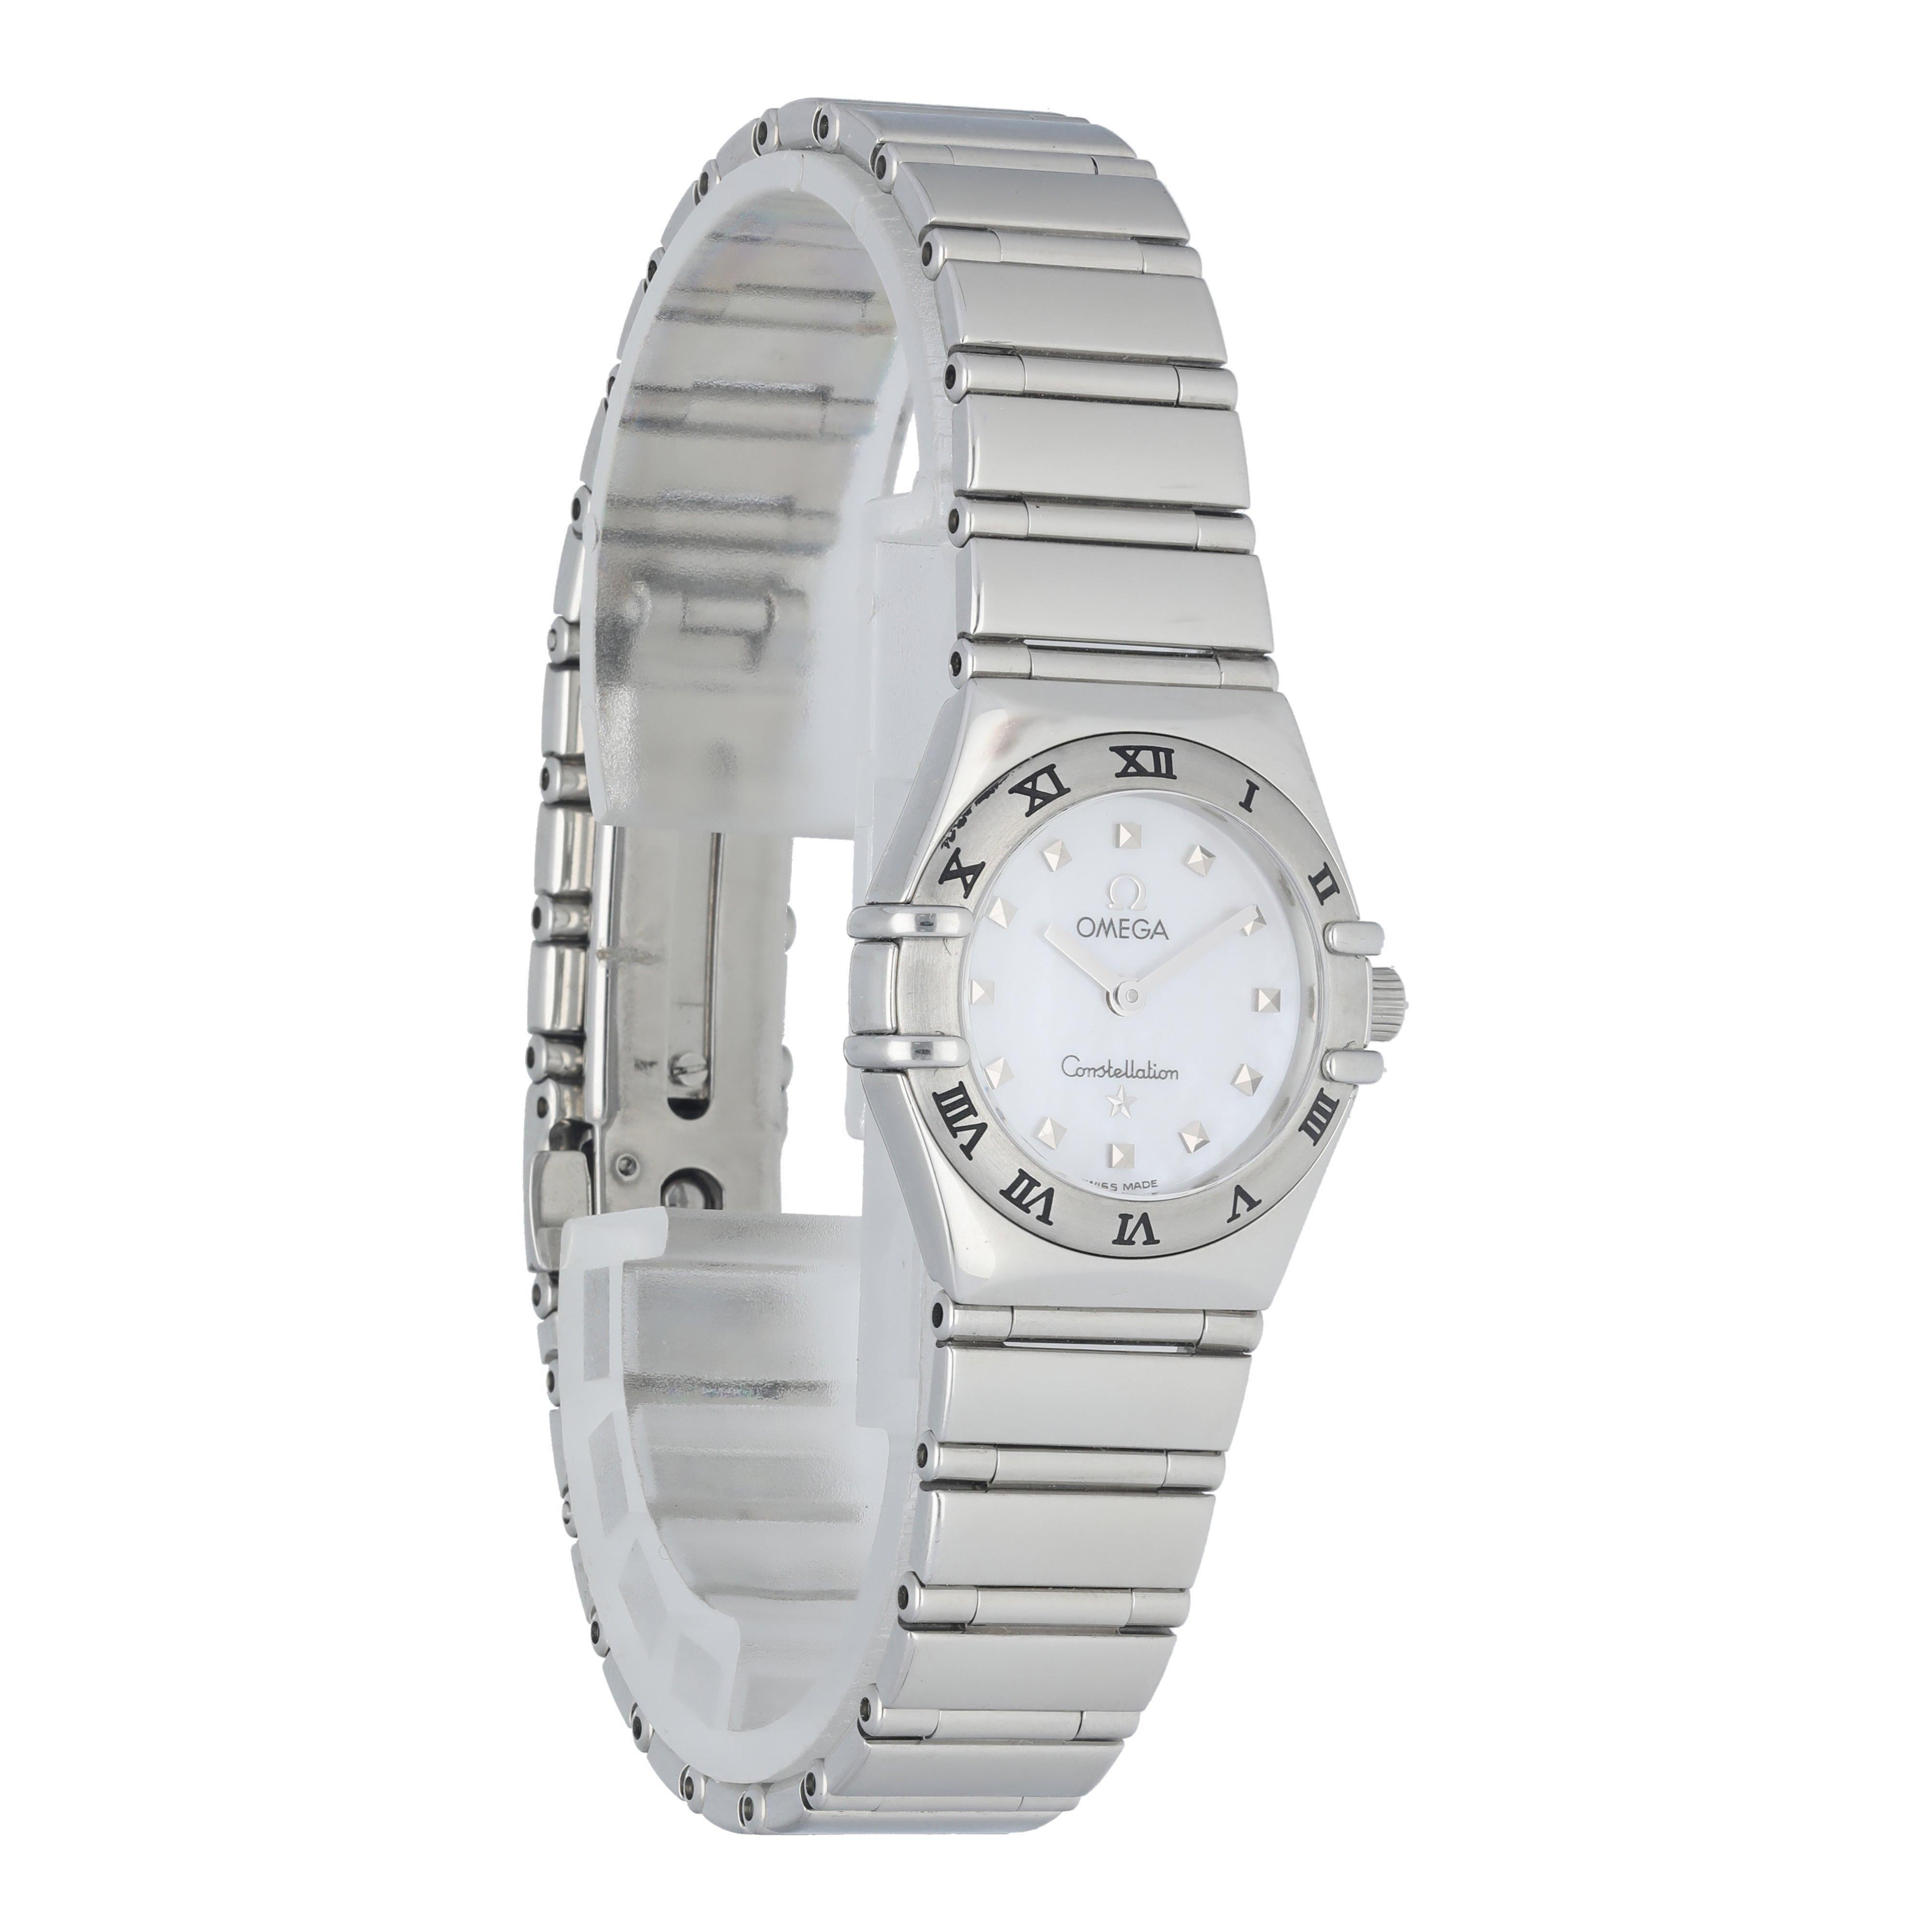  Omega Constellation My Choice Mini 1561.71.00 Ladies Watch.
 23mm stainless steel case and bezel.
 Blue mother of pearl dial with steel hands and pyramid hour markers.
 stainless steel bracelet with a single push-button fold-over clasp.
 Will fit